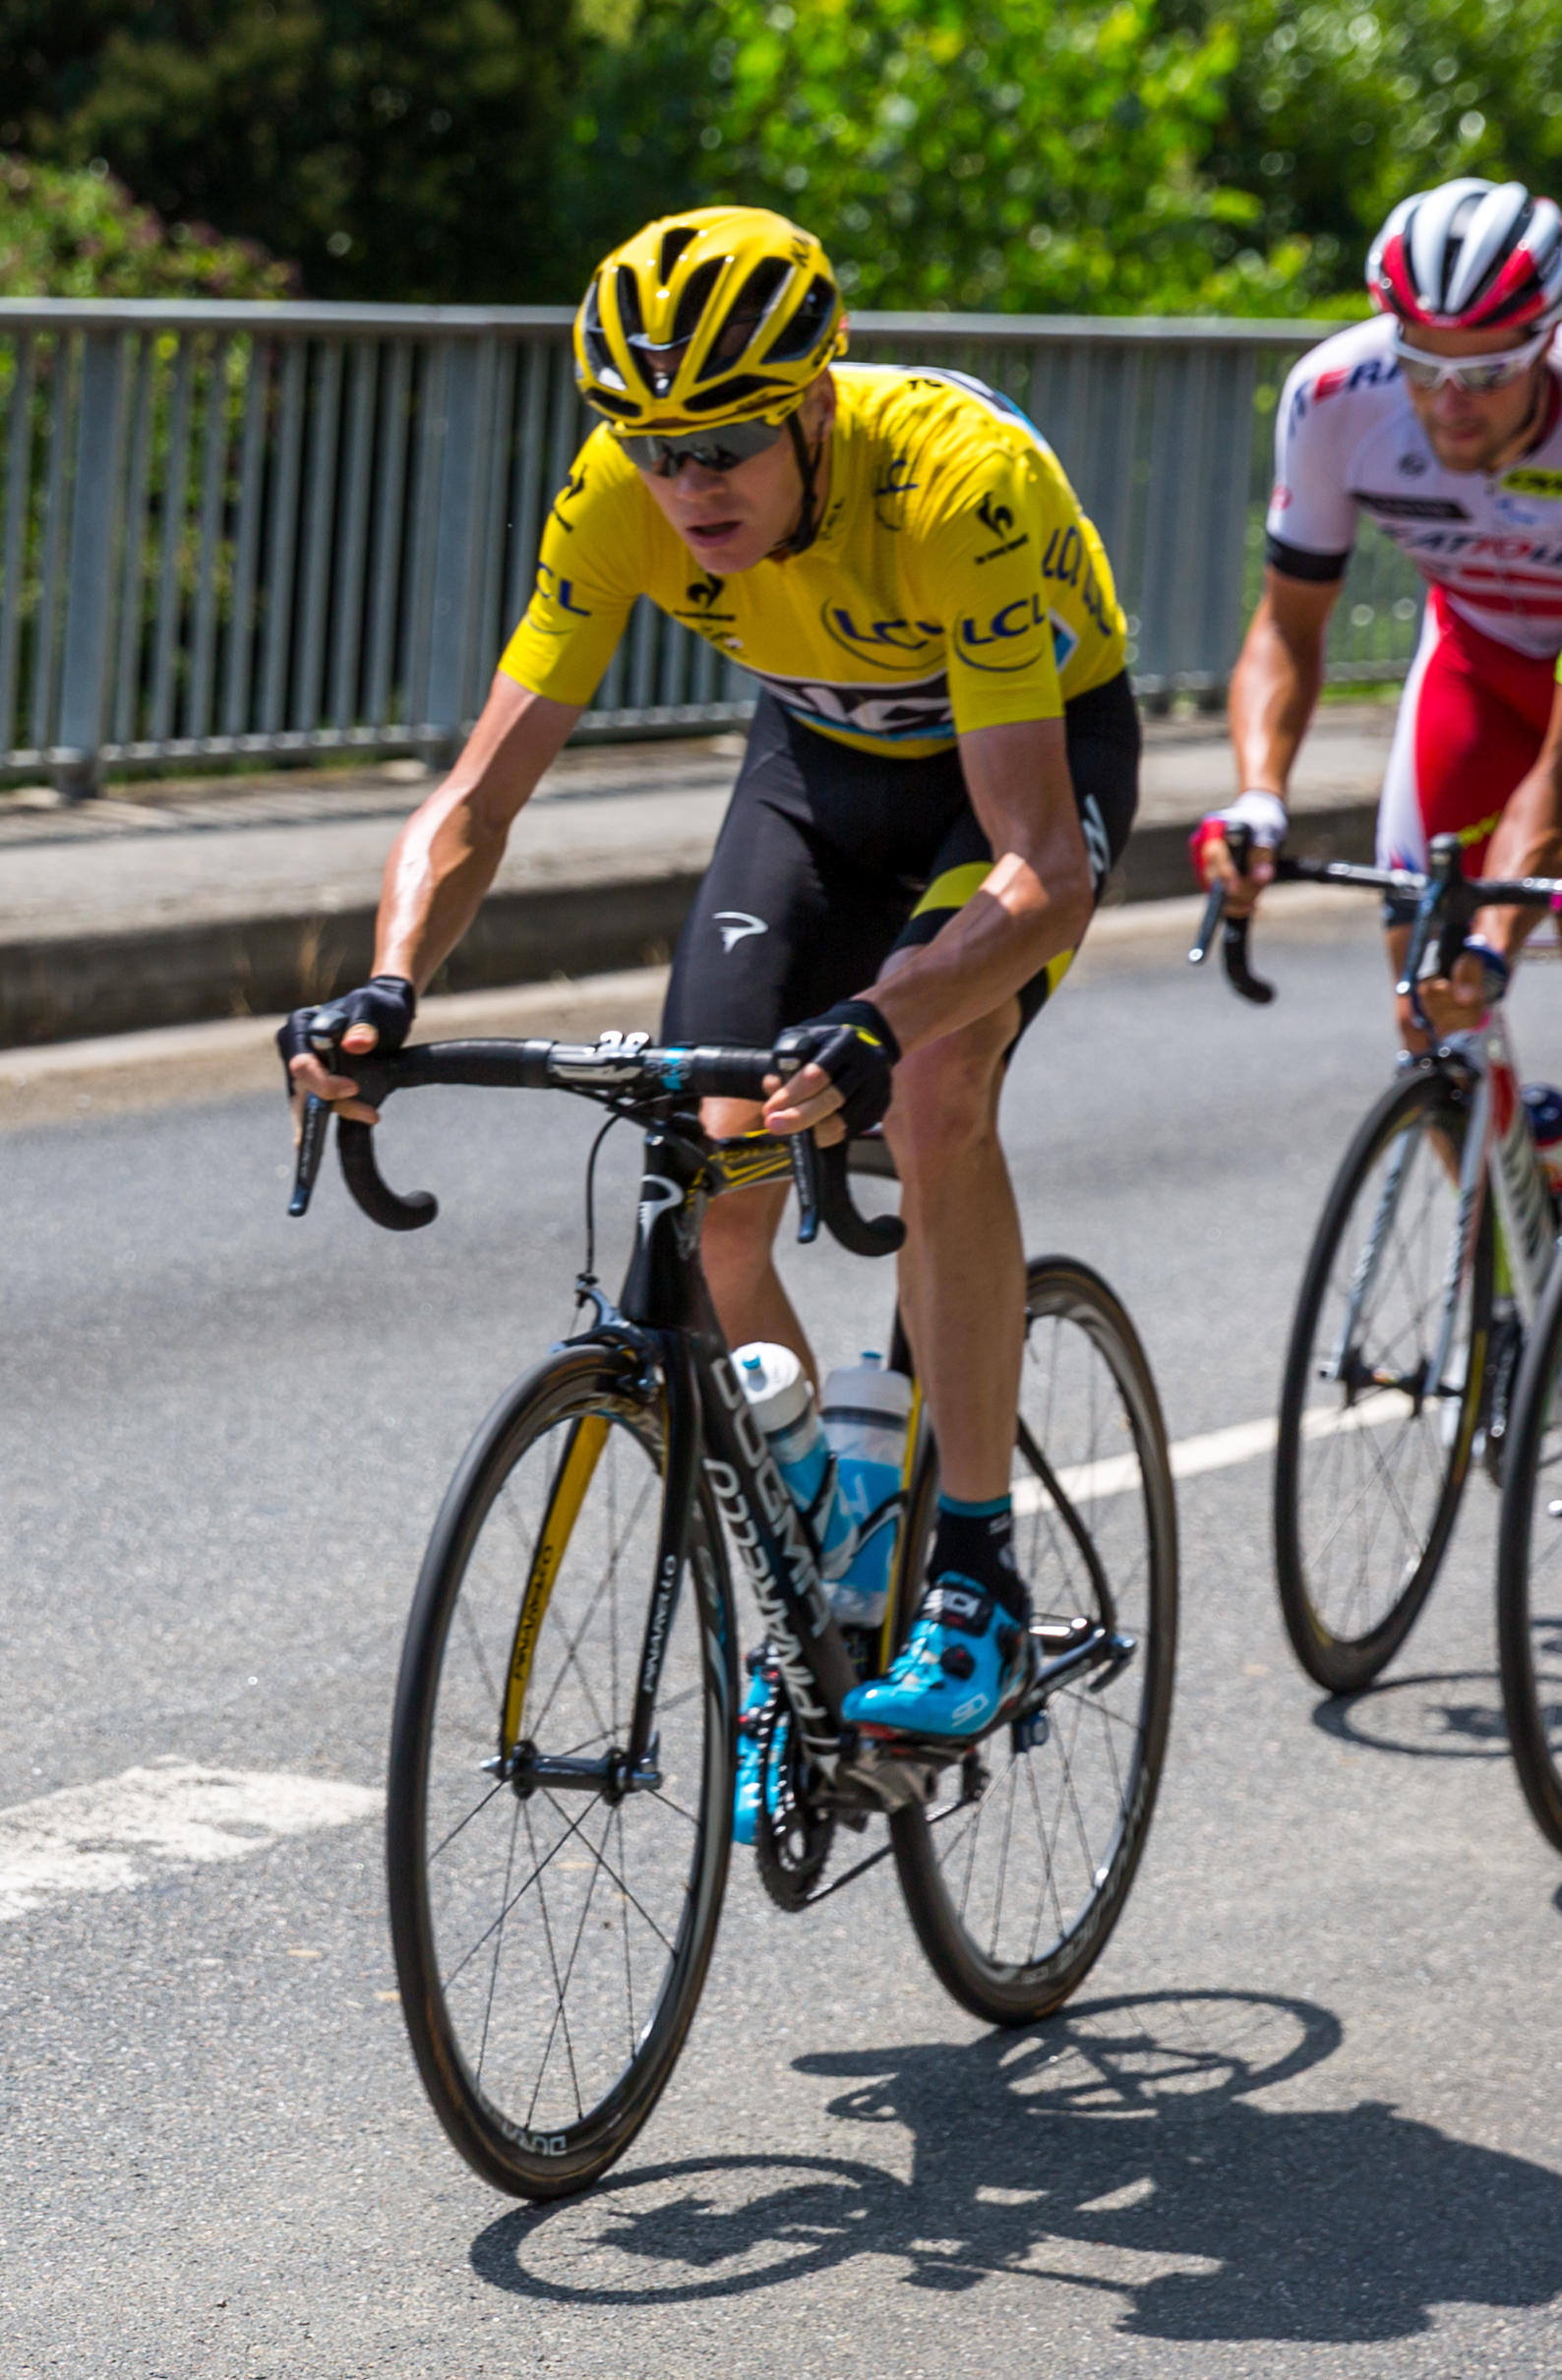 Cycling-Froome out of Tour de France after crash in Criterium